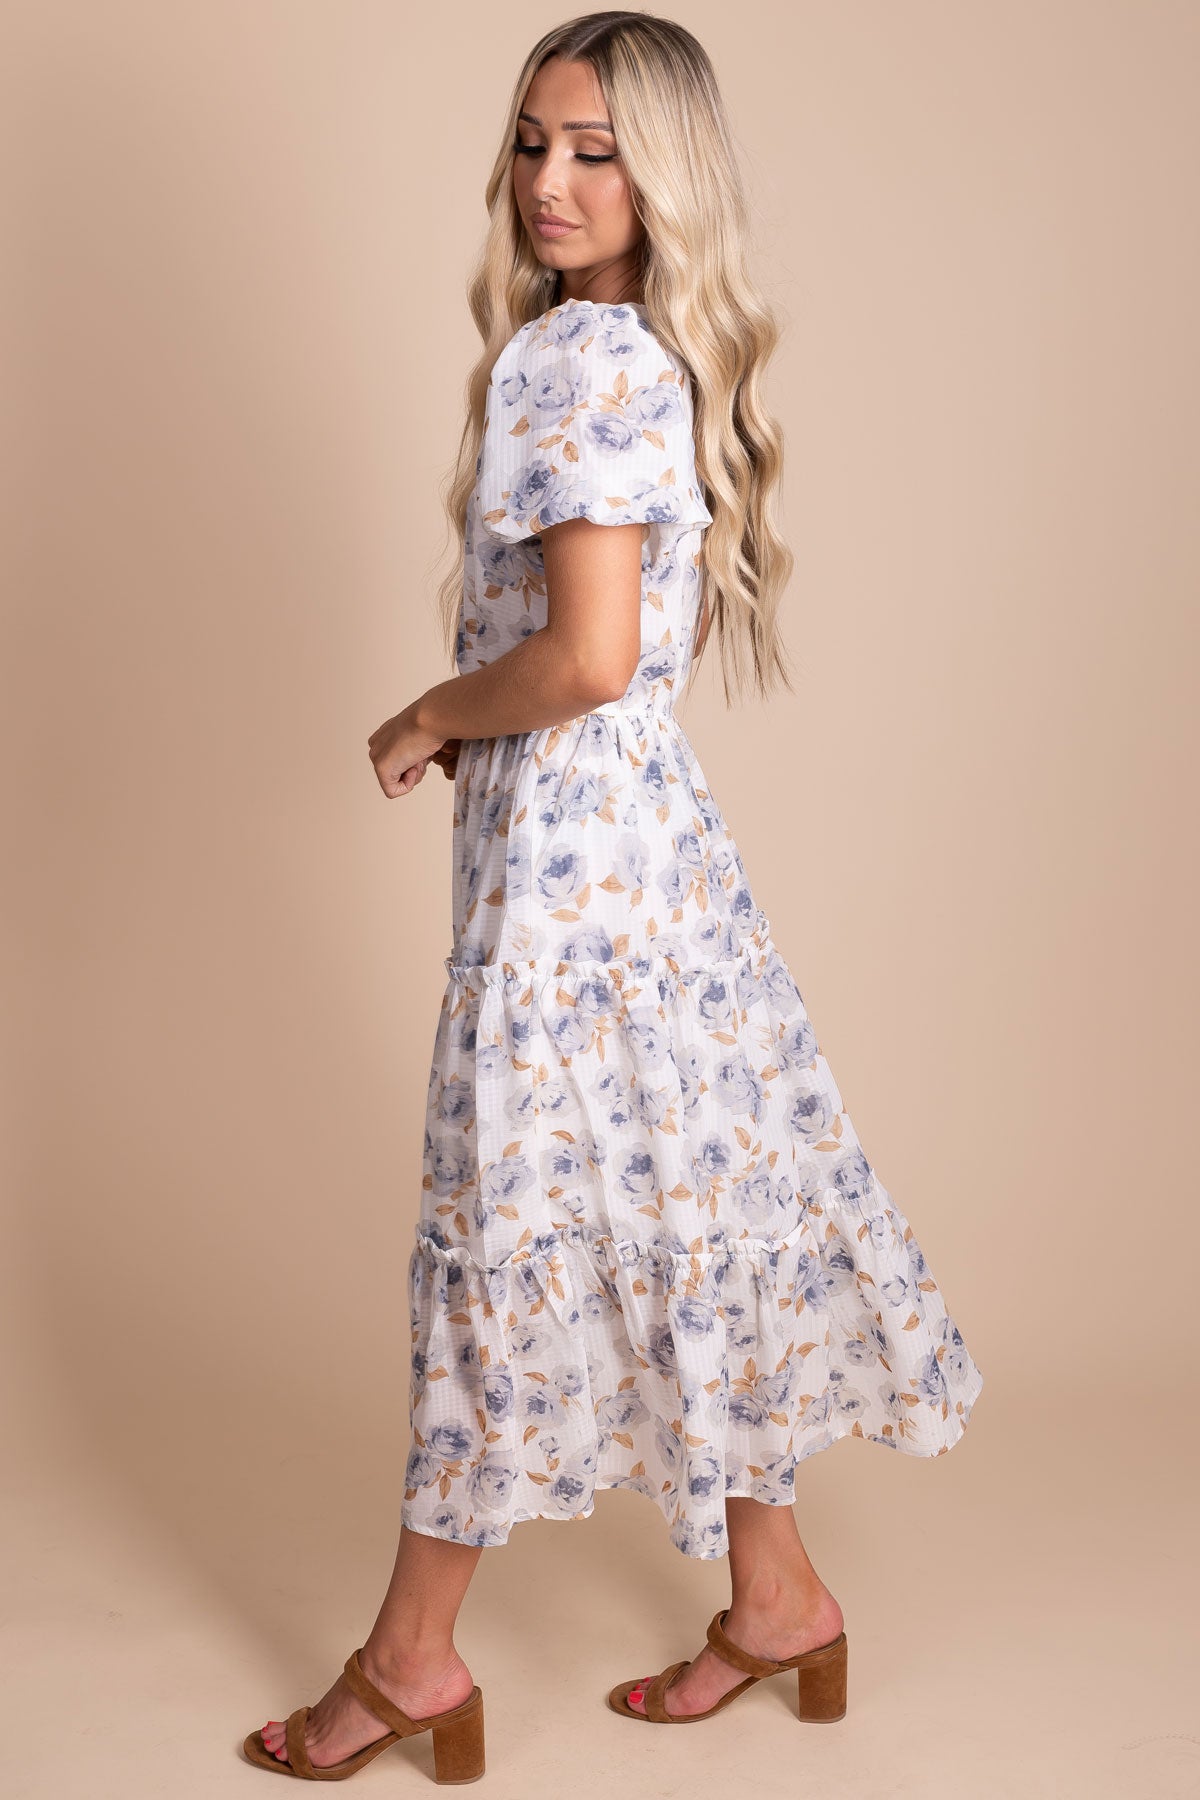 special occasion floral midi dress for women summer 2021 fashion